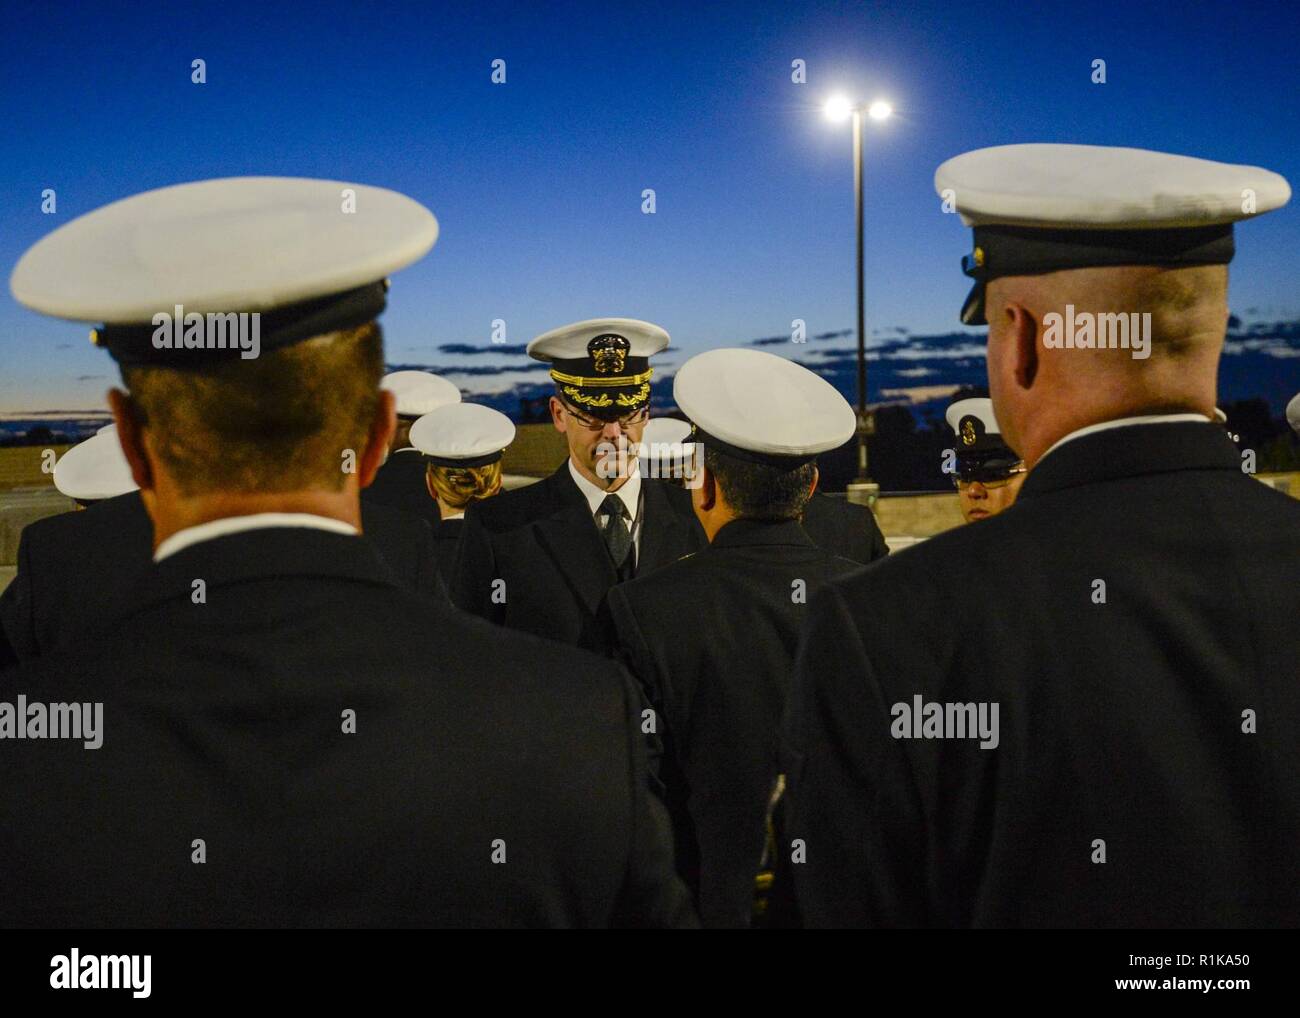 SAN DIEIGO (Oct. 12,2018) — Capt. Alan Christian, Director for Administration (DFA) at Naval Medical Center San Diego (NMCSD), inspects uniforms during a service dress blue uniform inspection in preparation for the seasonal uniform change. NMCSD is the largest naval hospital on the west coast, employing more than 6,000 Sailors, civilians and contractors. Stock Photo